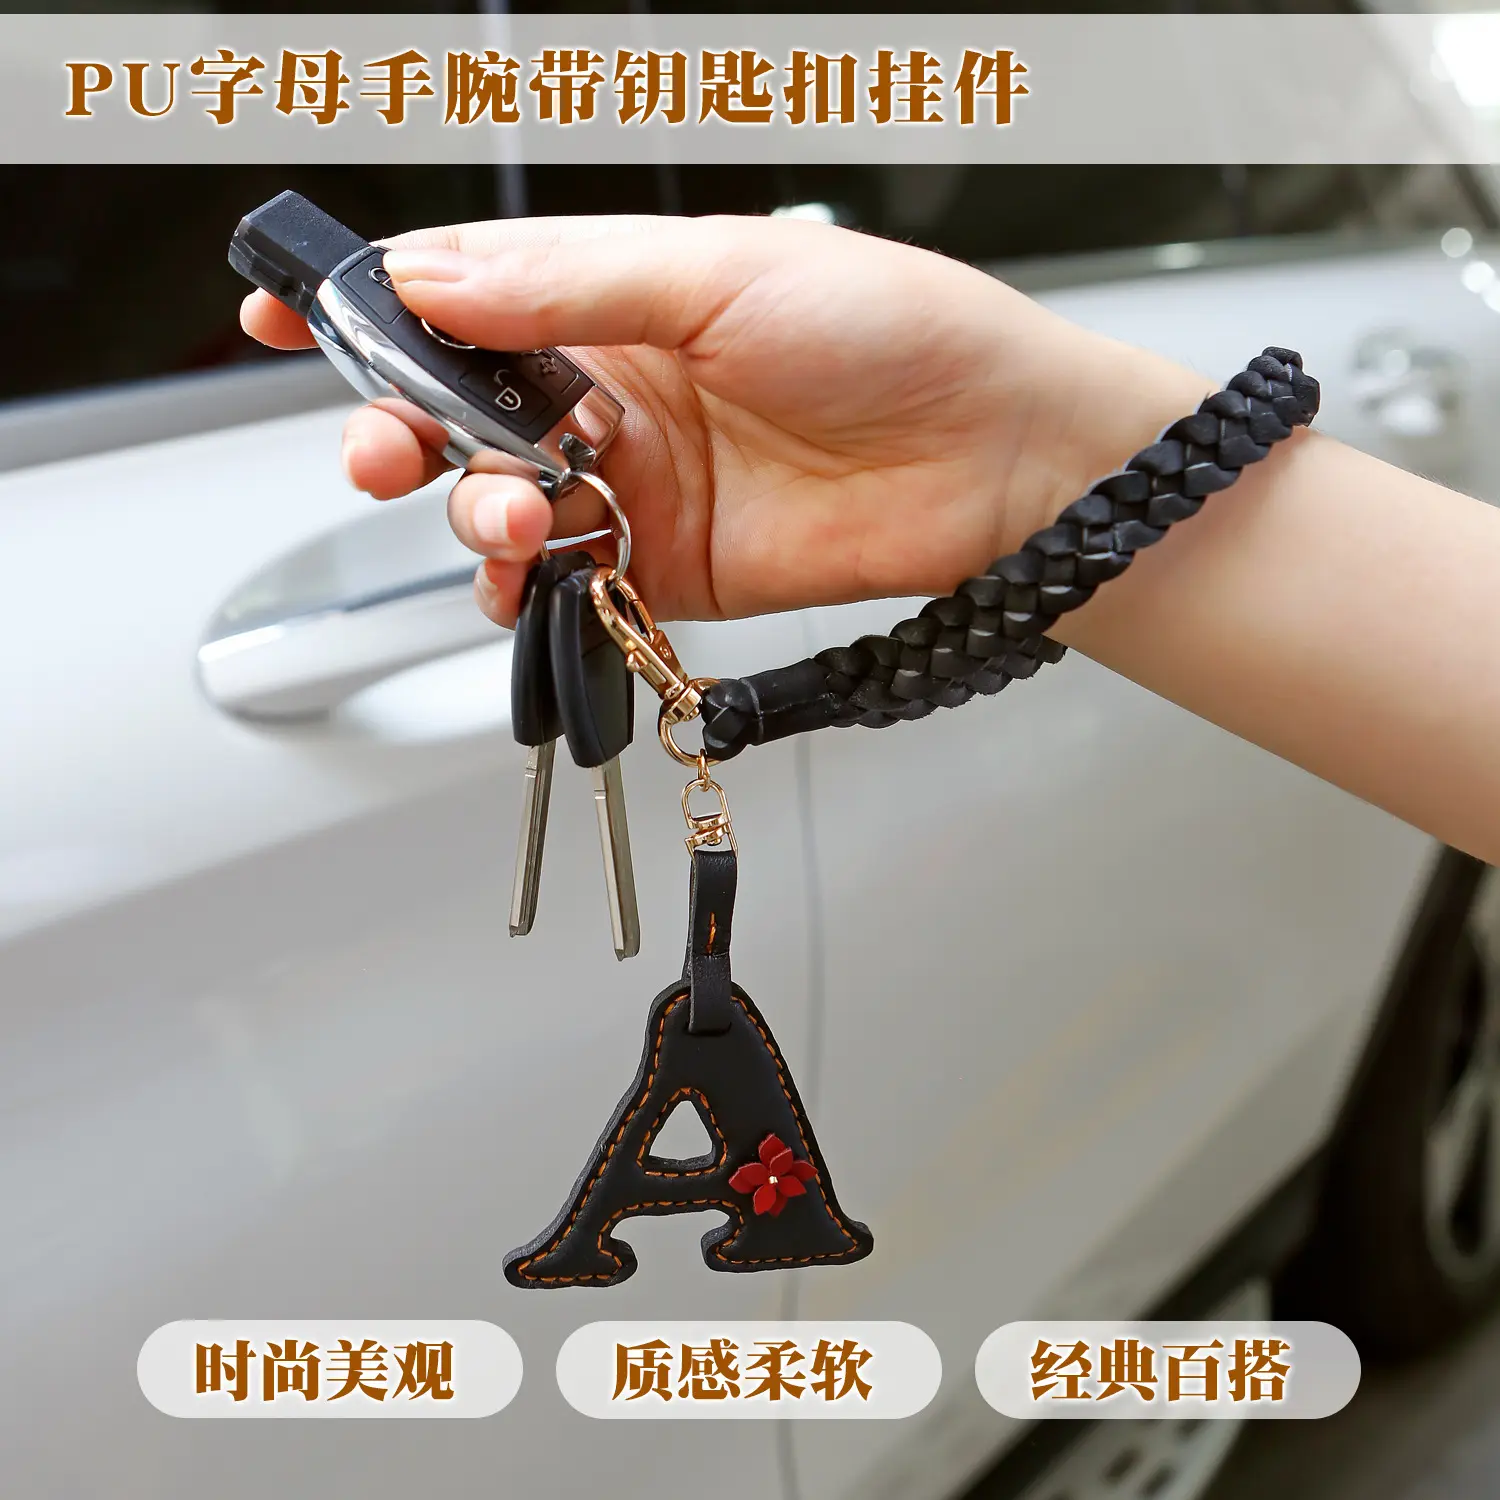 Handwoven wrist ring keychain leather PU Instagram hot search letter key accessories